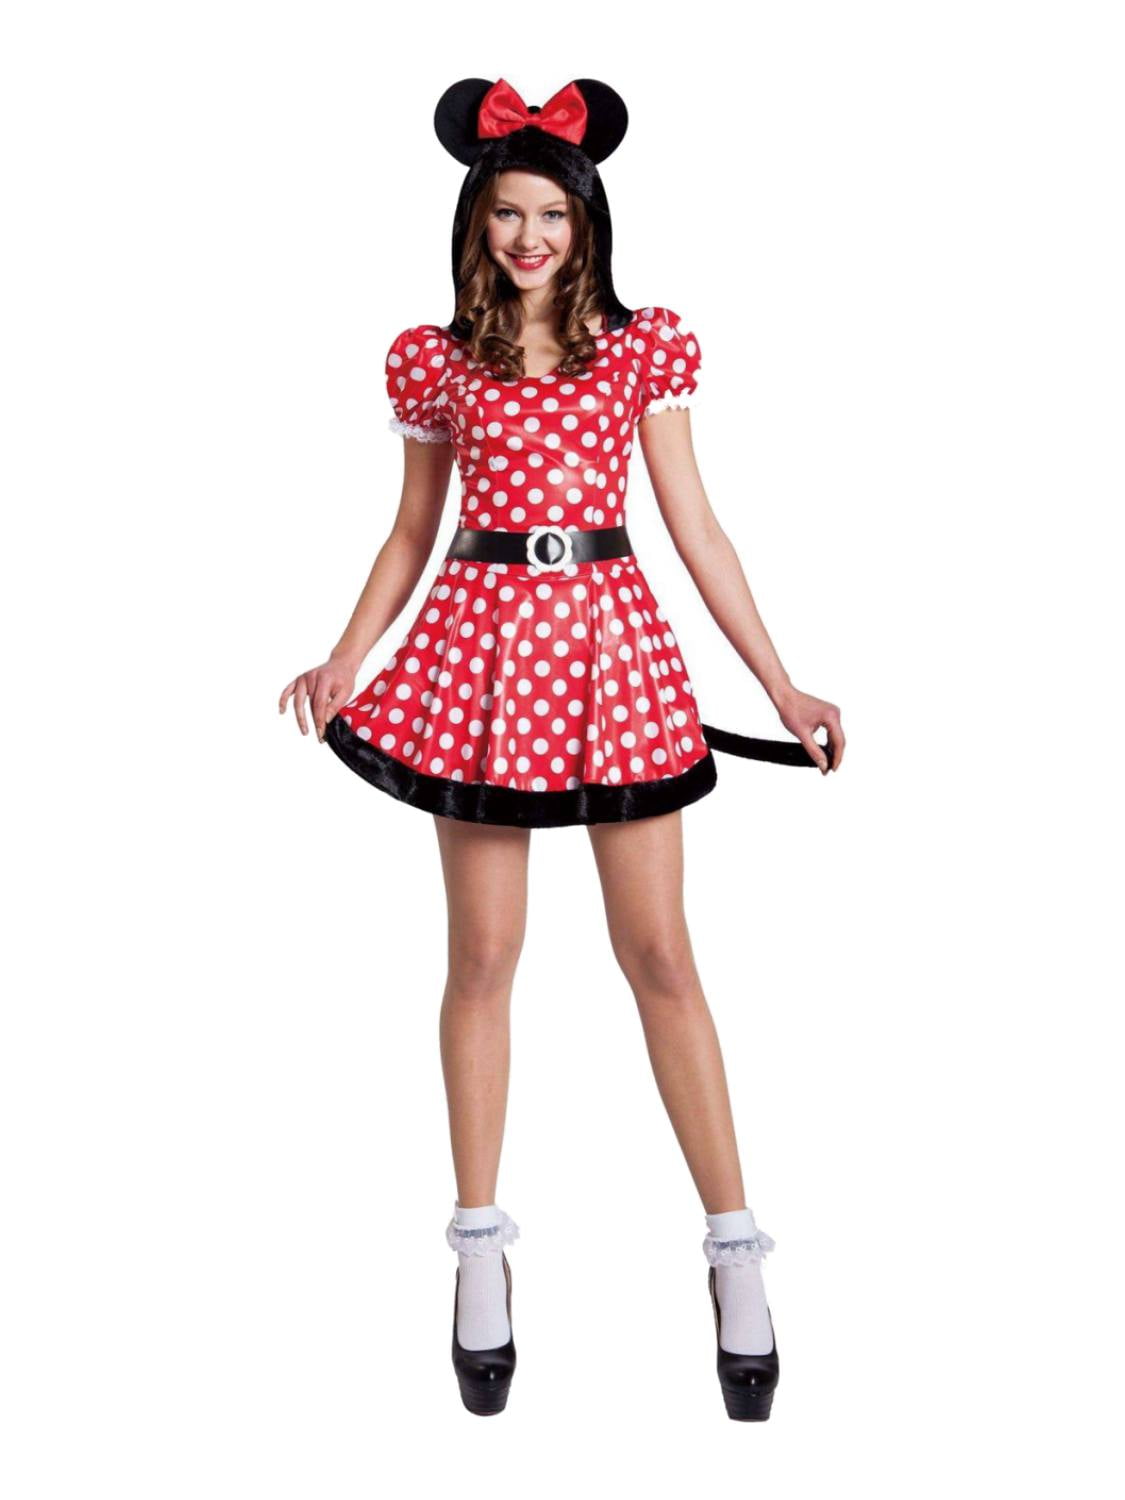 sassy minnie mouse costume.